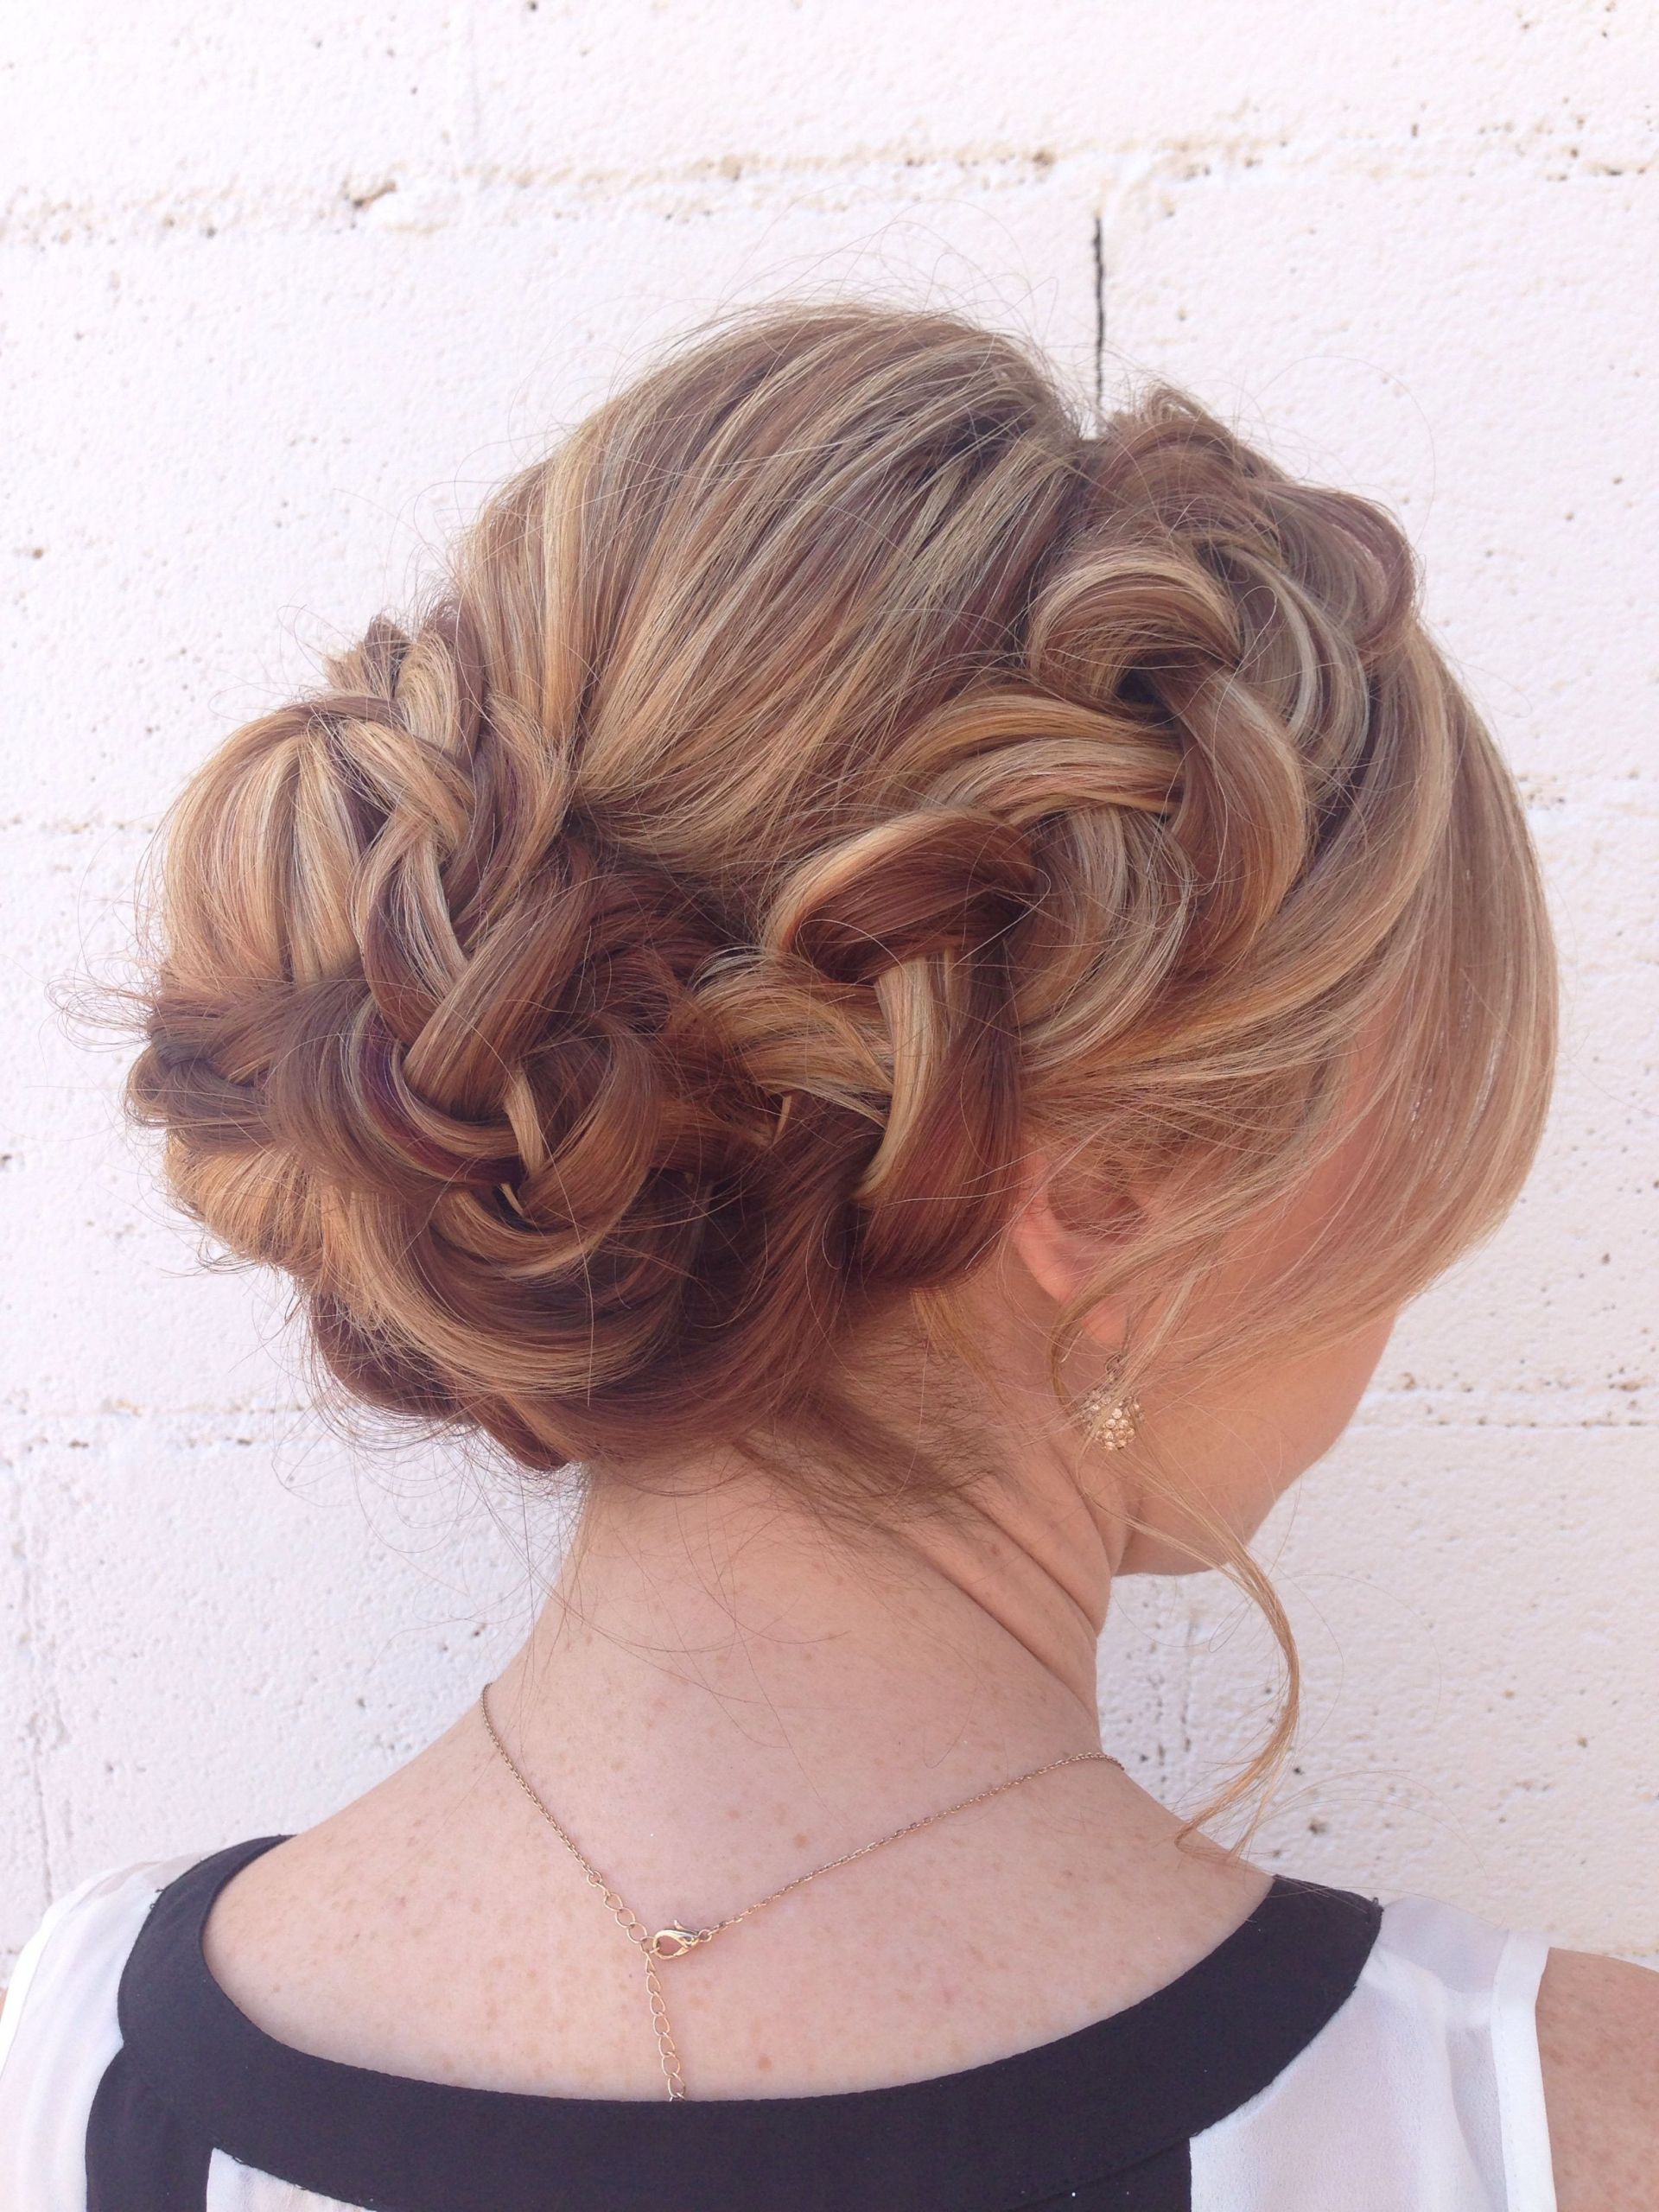 Prom Hairstyles For Thick Hair
 Soft braided updo for long thick hair